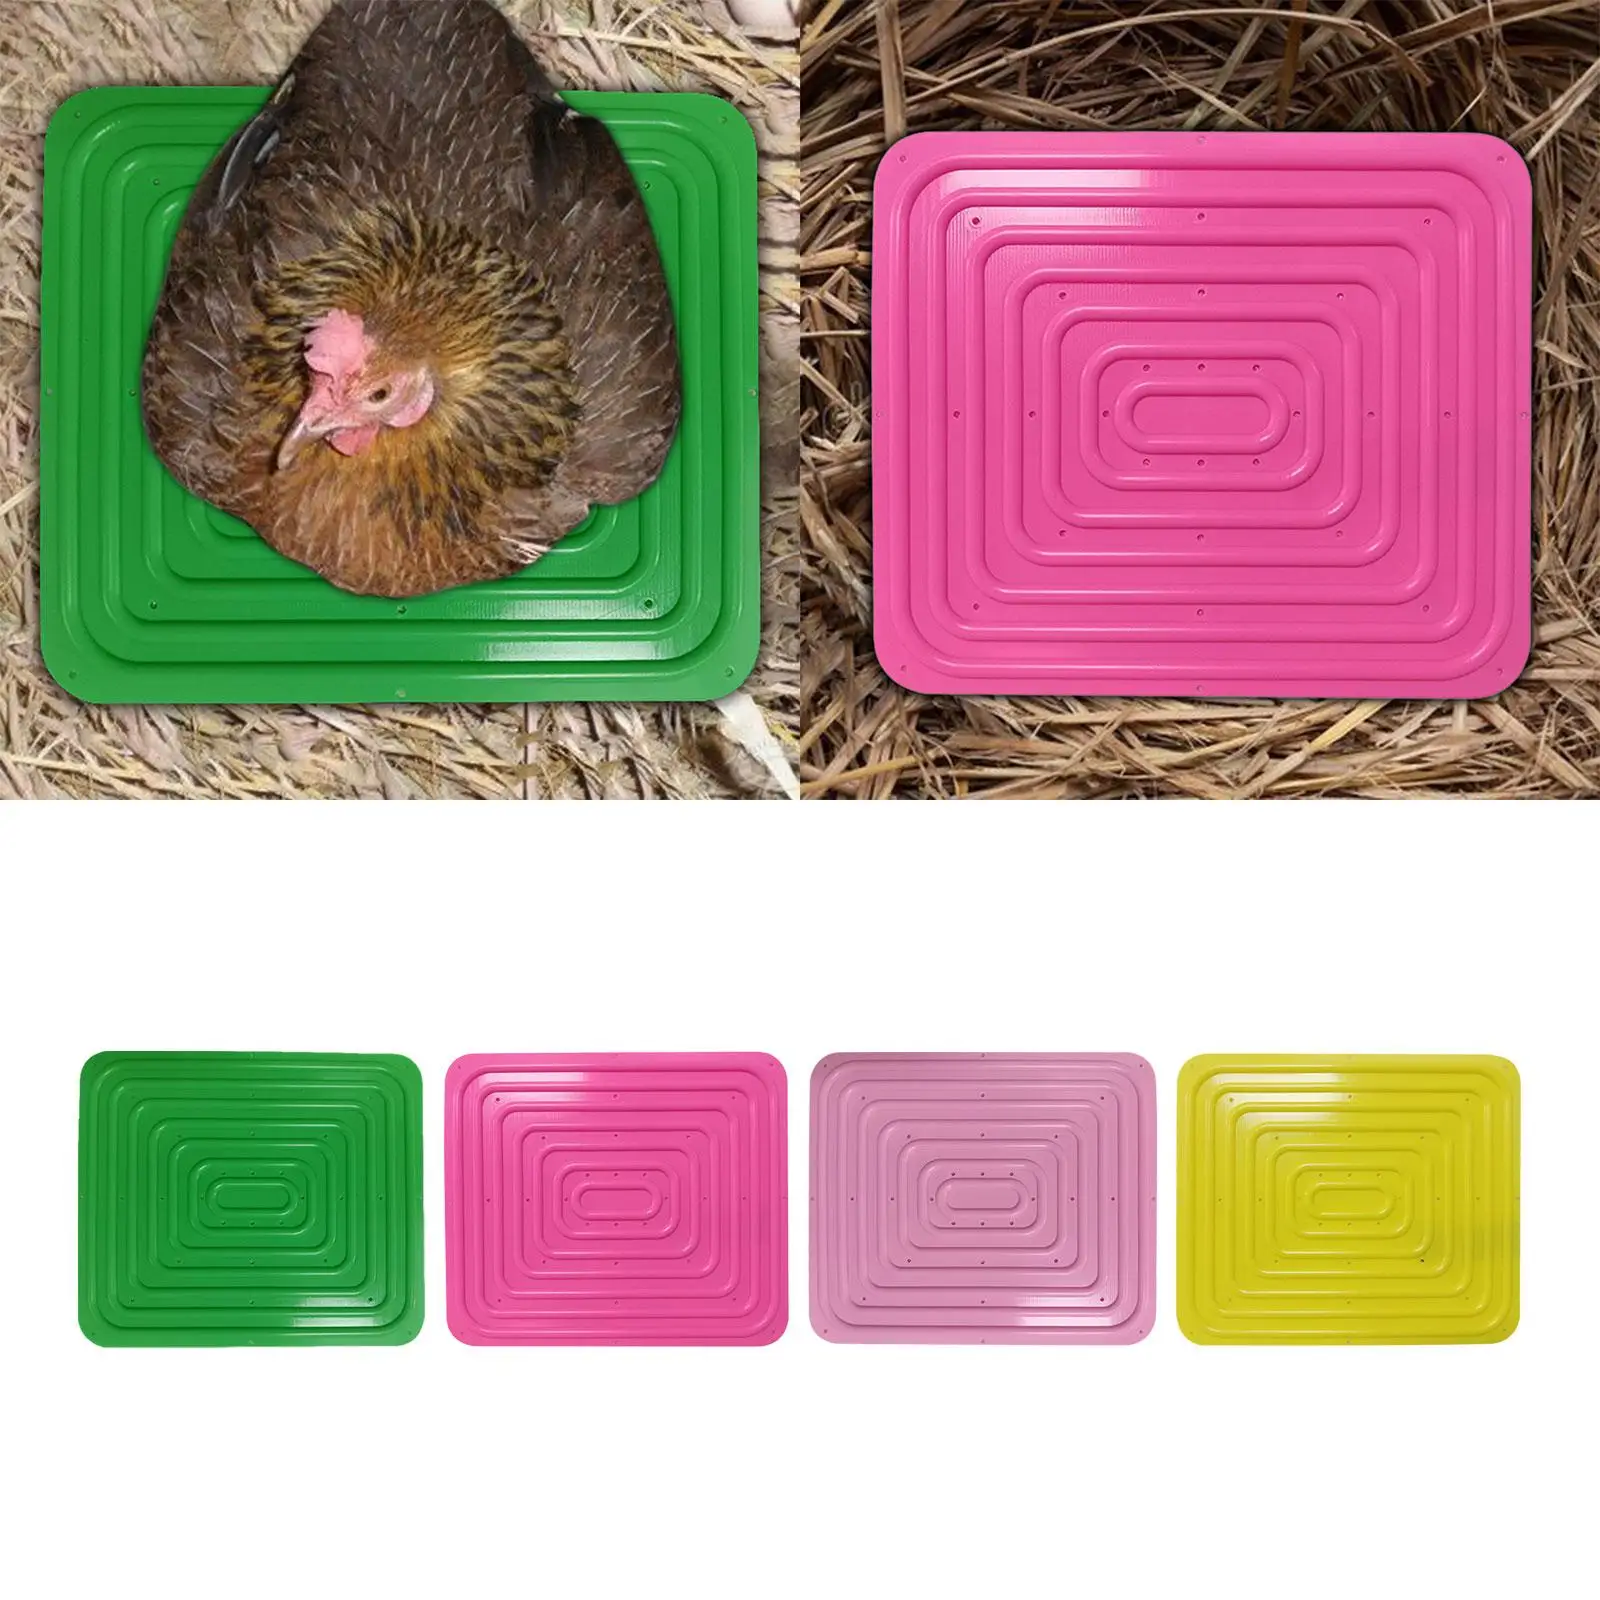 Chicken Nesting Pads for Laying Eggs Soft Chicken Laying Pad Nesting Box Pad Chicken Mat for Garden Hen Coop Brooder Box Poultry